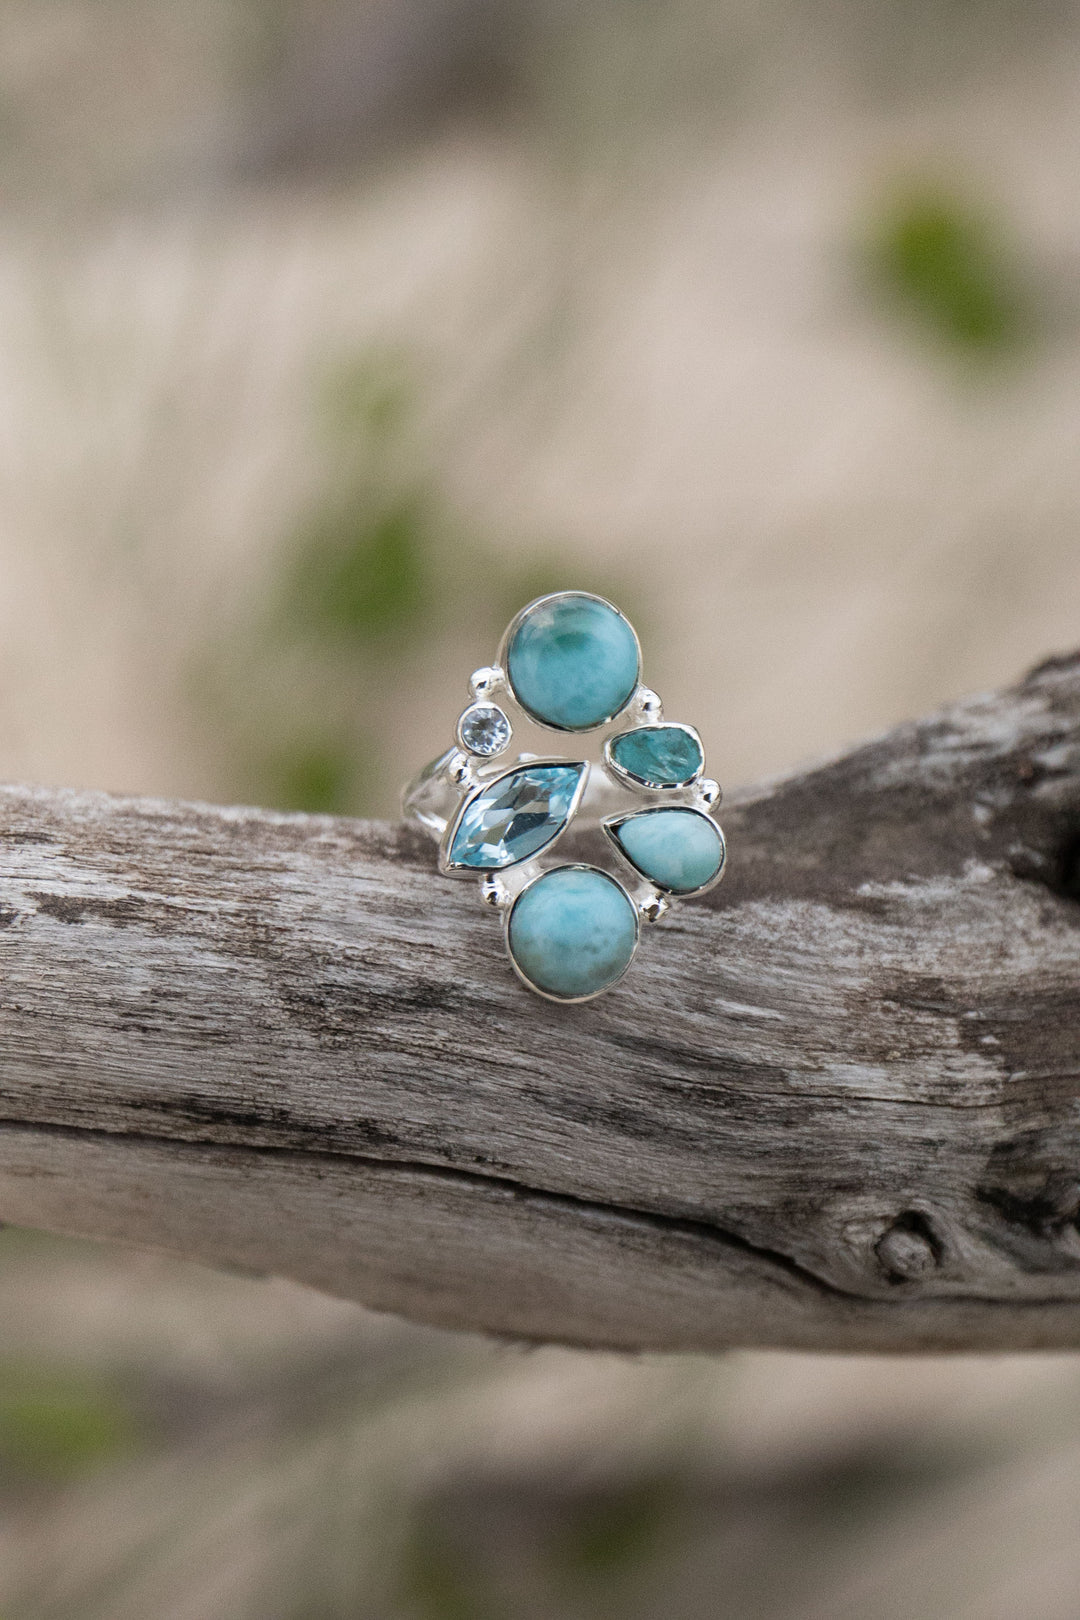 Multi Gemstone Ring with Larimar, Topaz and Raw Apatite in Sterling Silver - Size 8 US